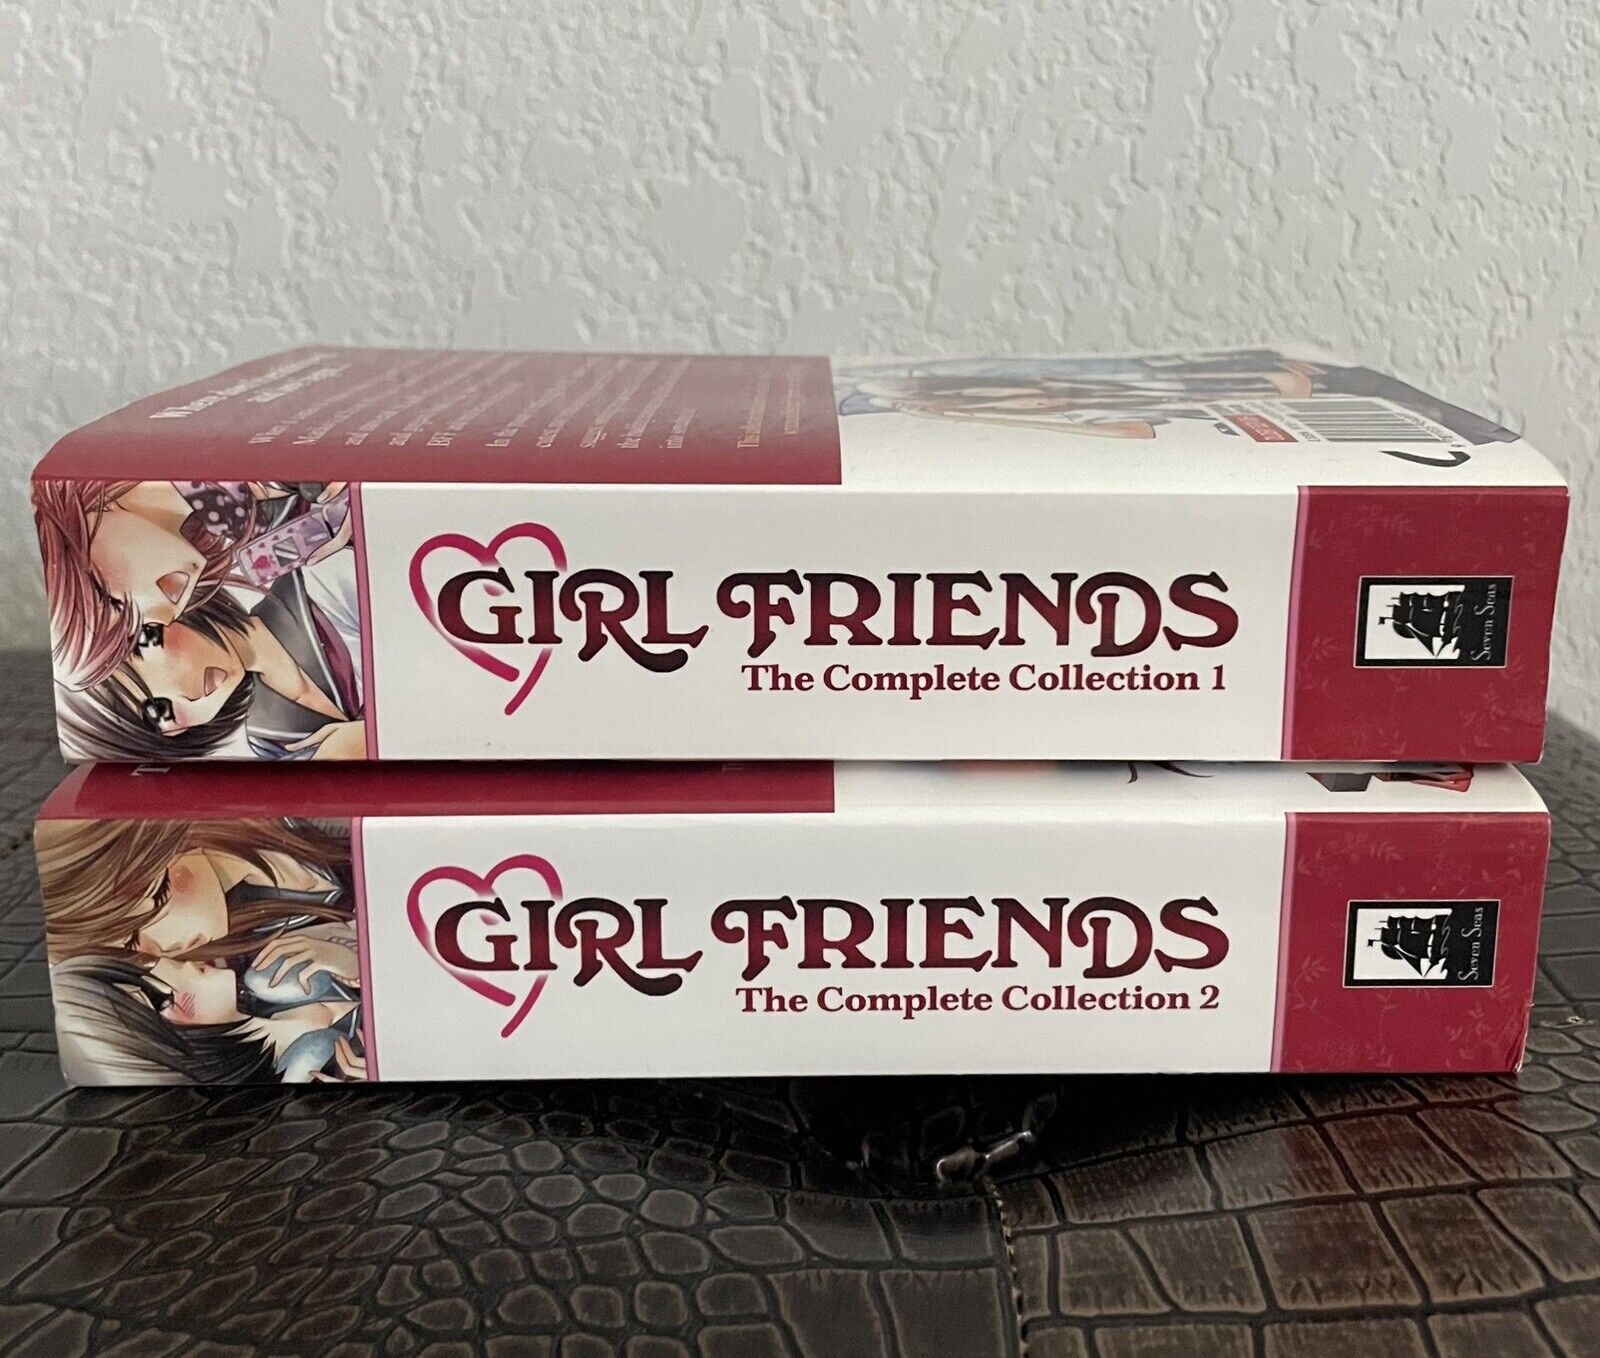 Girl Friends English Yuri Manga Books Complete Collections Volume 1 and 2